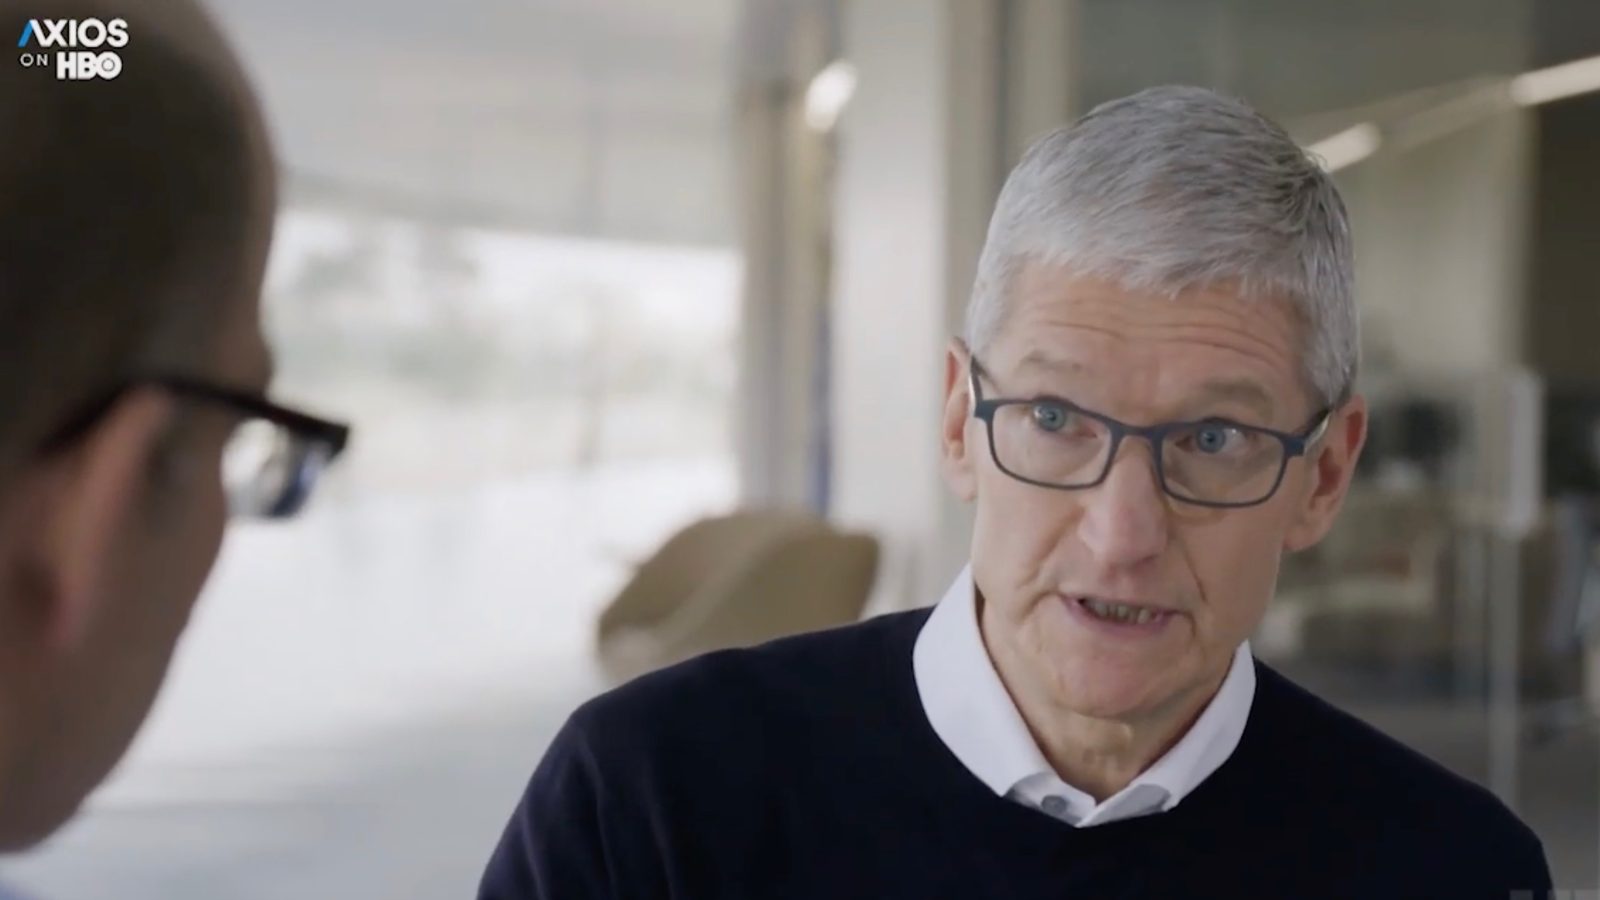 Tim Cook talks search deals w/ Google, privacy in tech, and his daily routine in HBO interview